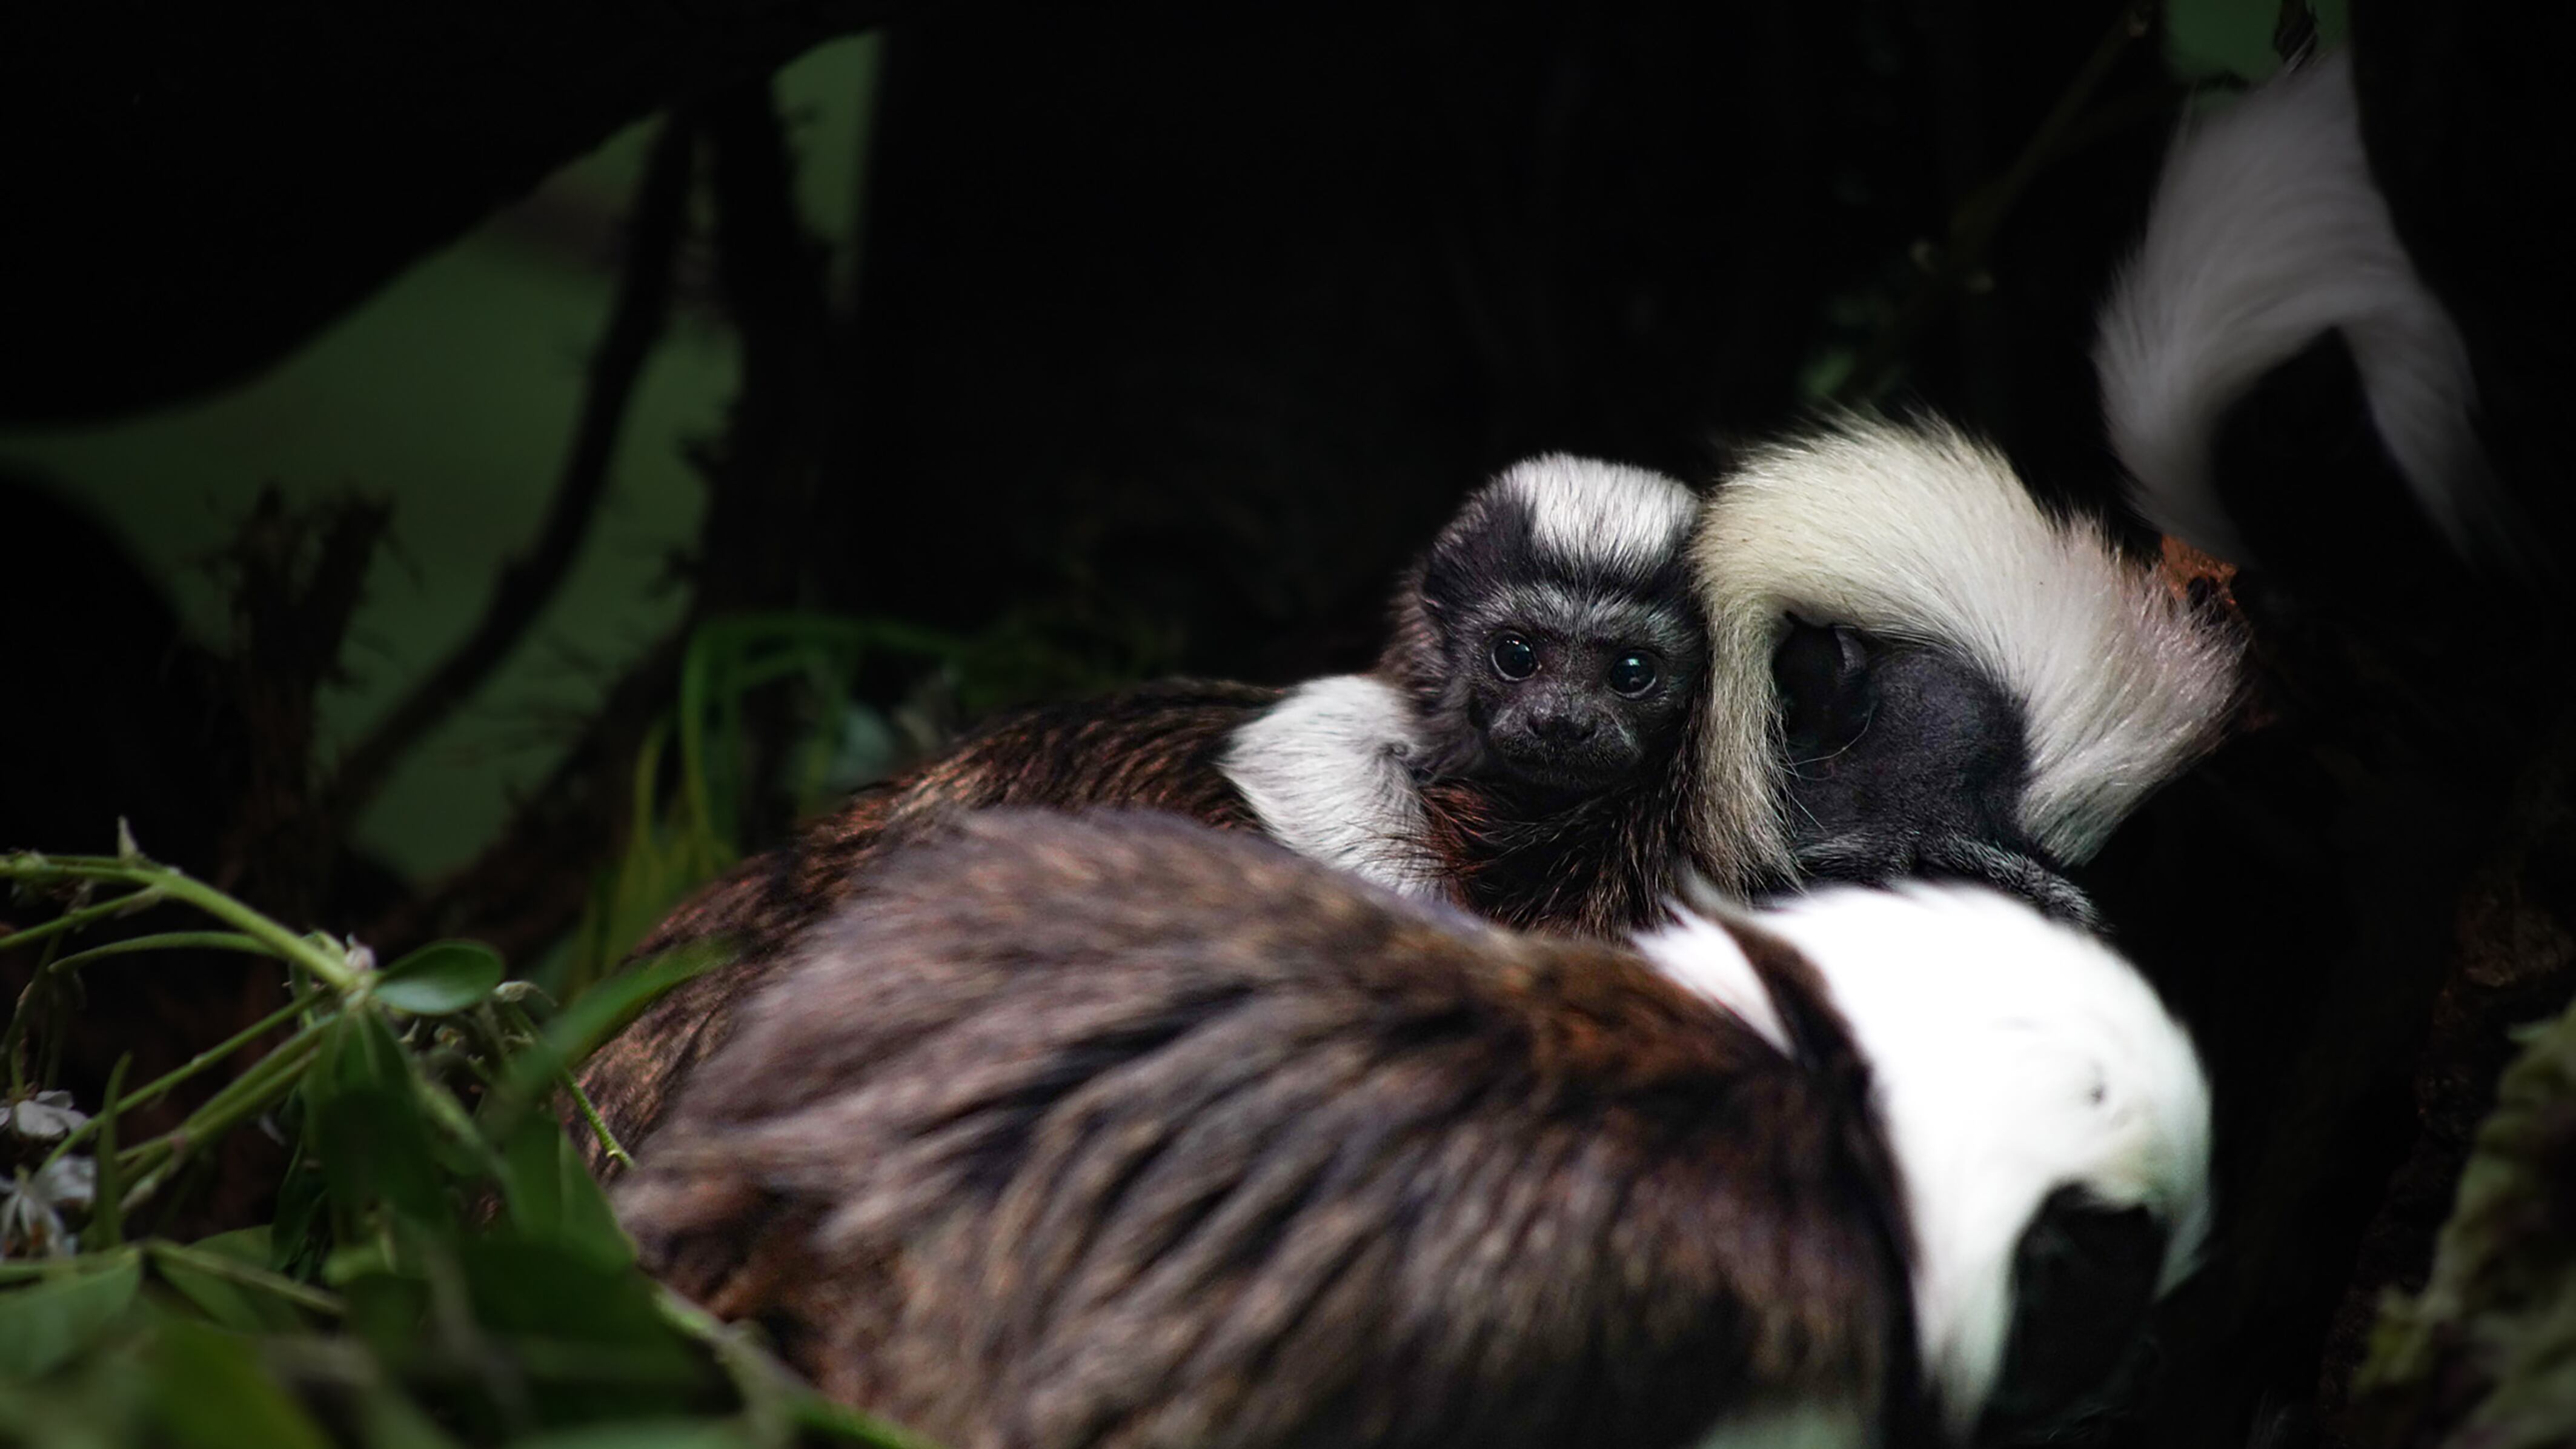 The newborn cotton-top tamarin will be named after an Addams Family character